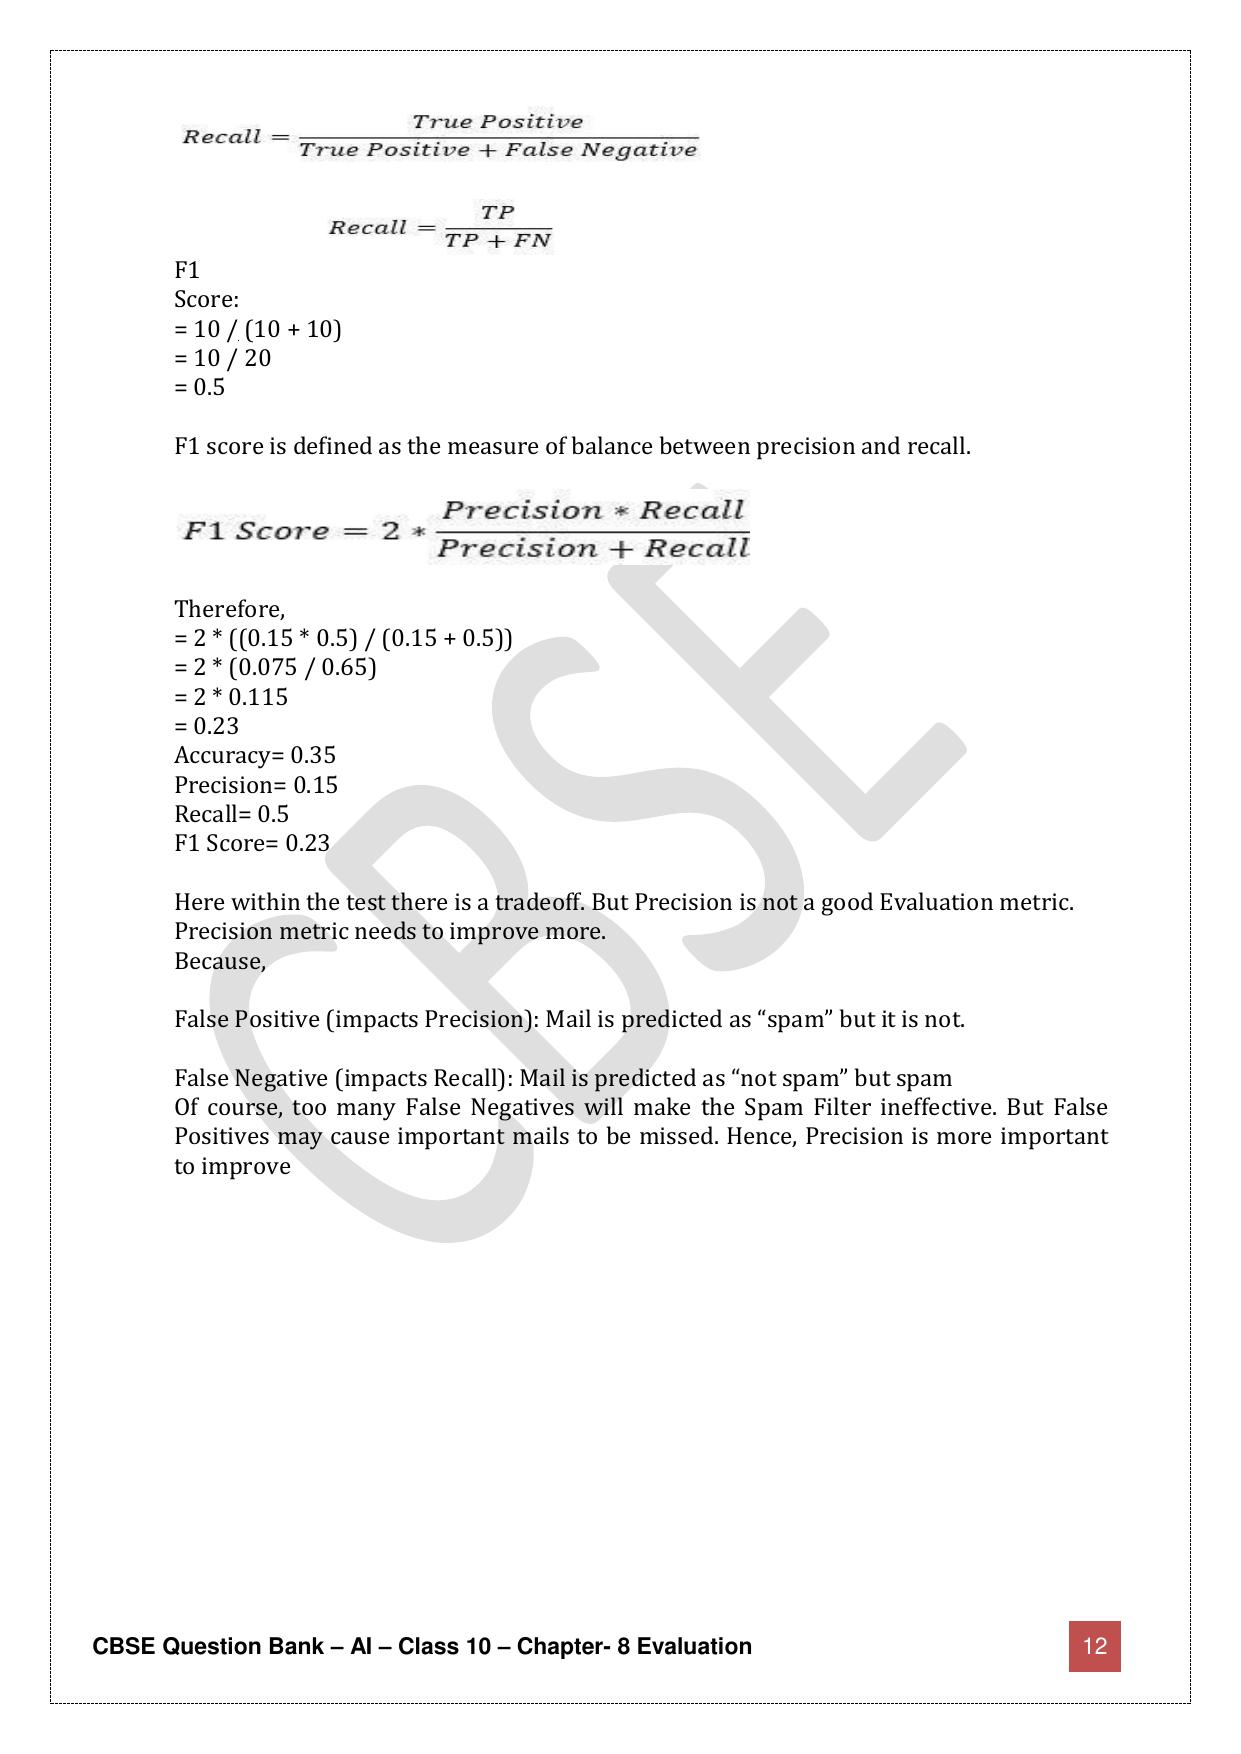 CBSE Class 10 Artificial Intelligence - Chapter 8 Question Bank - Page 12